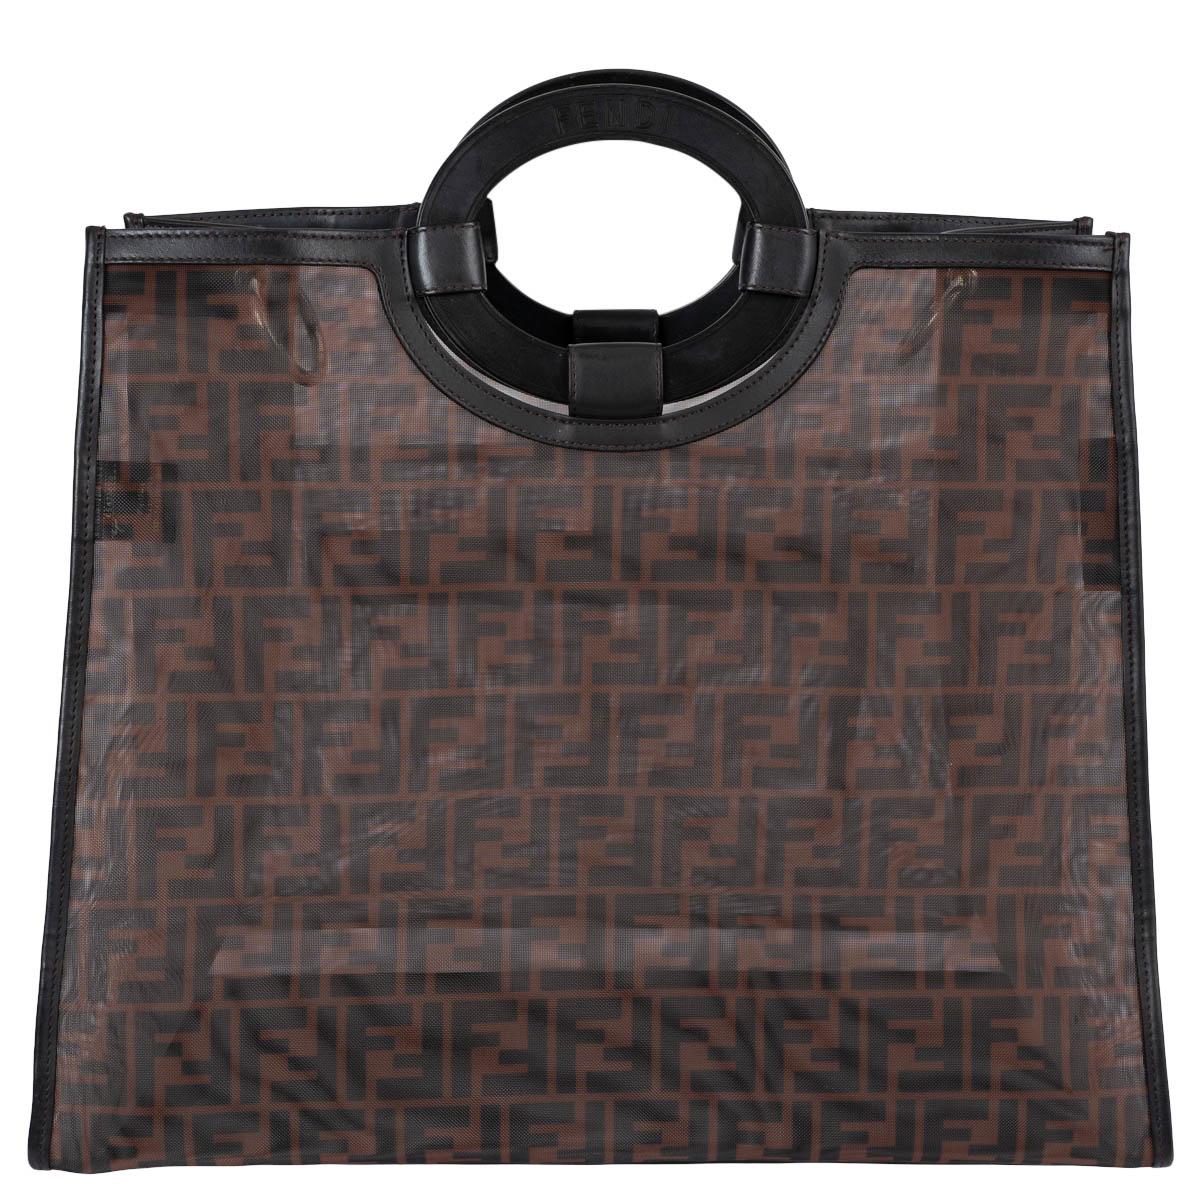 FENDI brown Zucca mesh 2018 RUNAWAY SHOPPING TOTE Bag In Excellent Condition For Sale In Zürich, CH